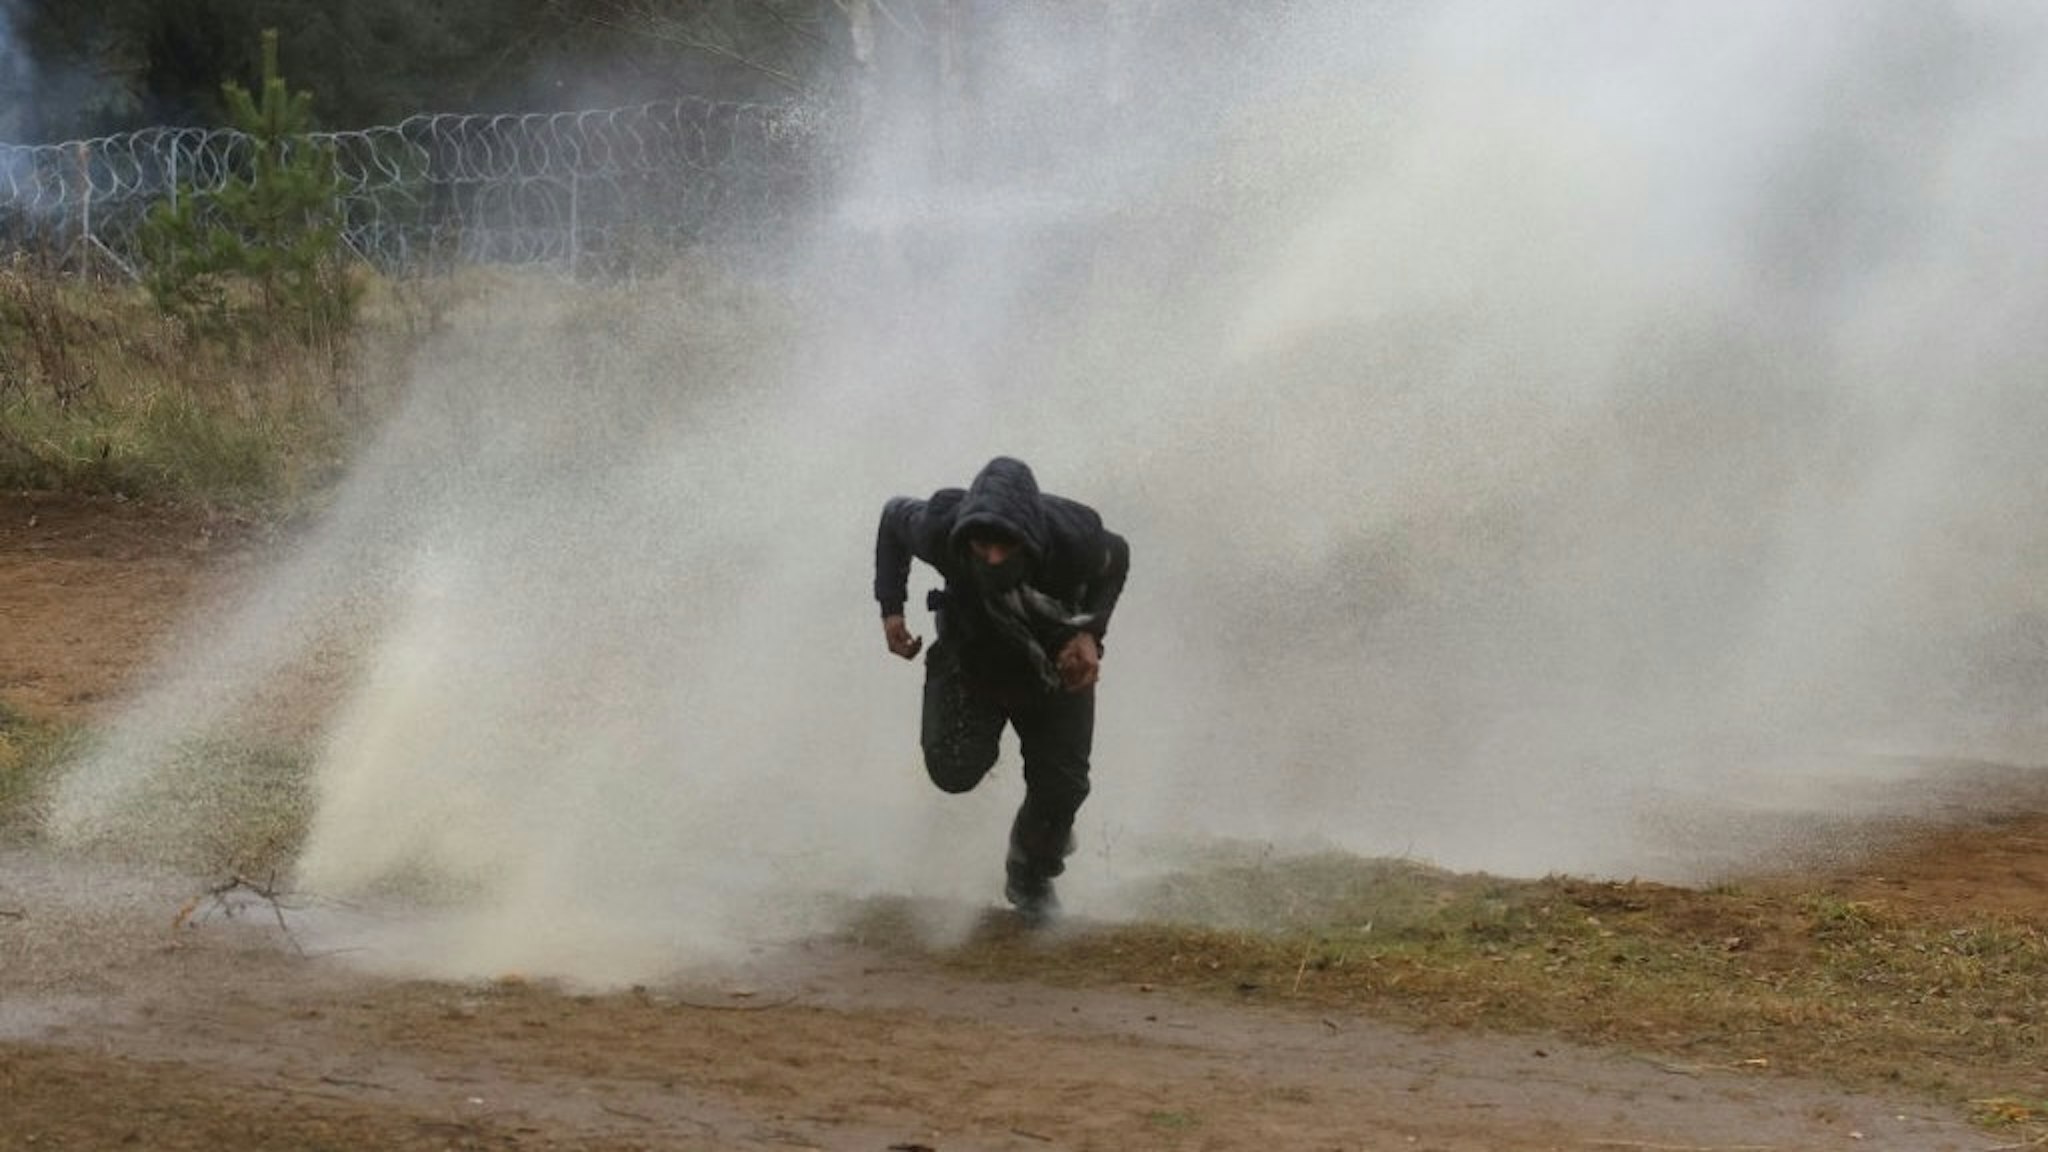 TOPSHOT-BELARUS-POLAND-EU-MIGRANTS TOPSHOT - A man runs away from a water cannon used by Polish law enforcement officers against migrants attempting to break into Poland at the Bruzgi-Kuznica border crossing on the Belarusian-Polish border on November 16, 2021. - - Belarus OUT (Photo by Leonid SHCHEGLOV / BELTA / AFP) / Belarus OUT (Photo by LEONID SHCHEGLOV/BELTA/AFP via Getty Images) LEONID SHCHEGLOV / Contributor